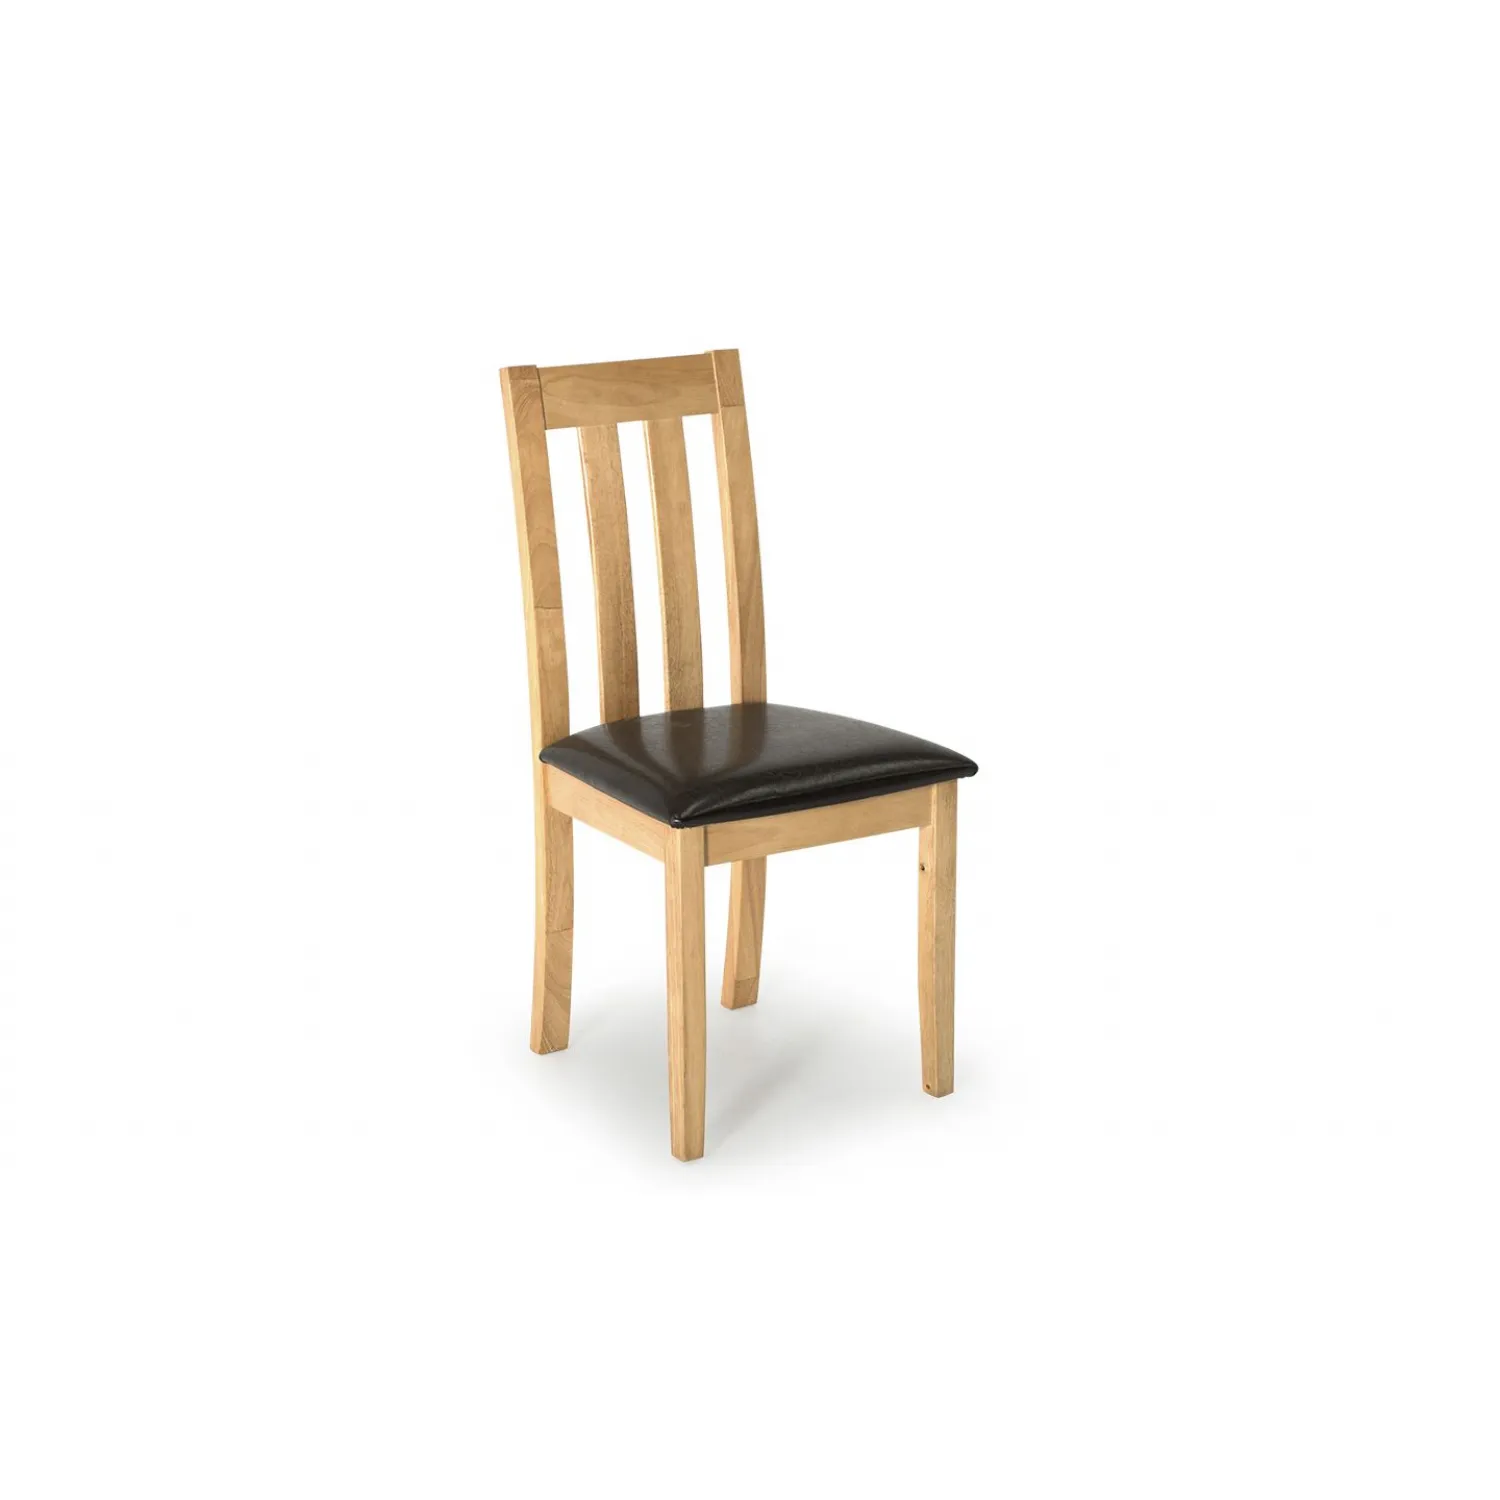 Solid Wood Slat Back Dining Chair Black PU Seat